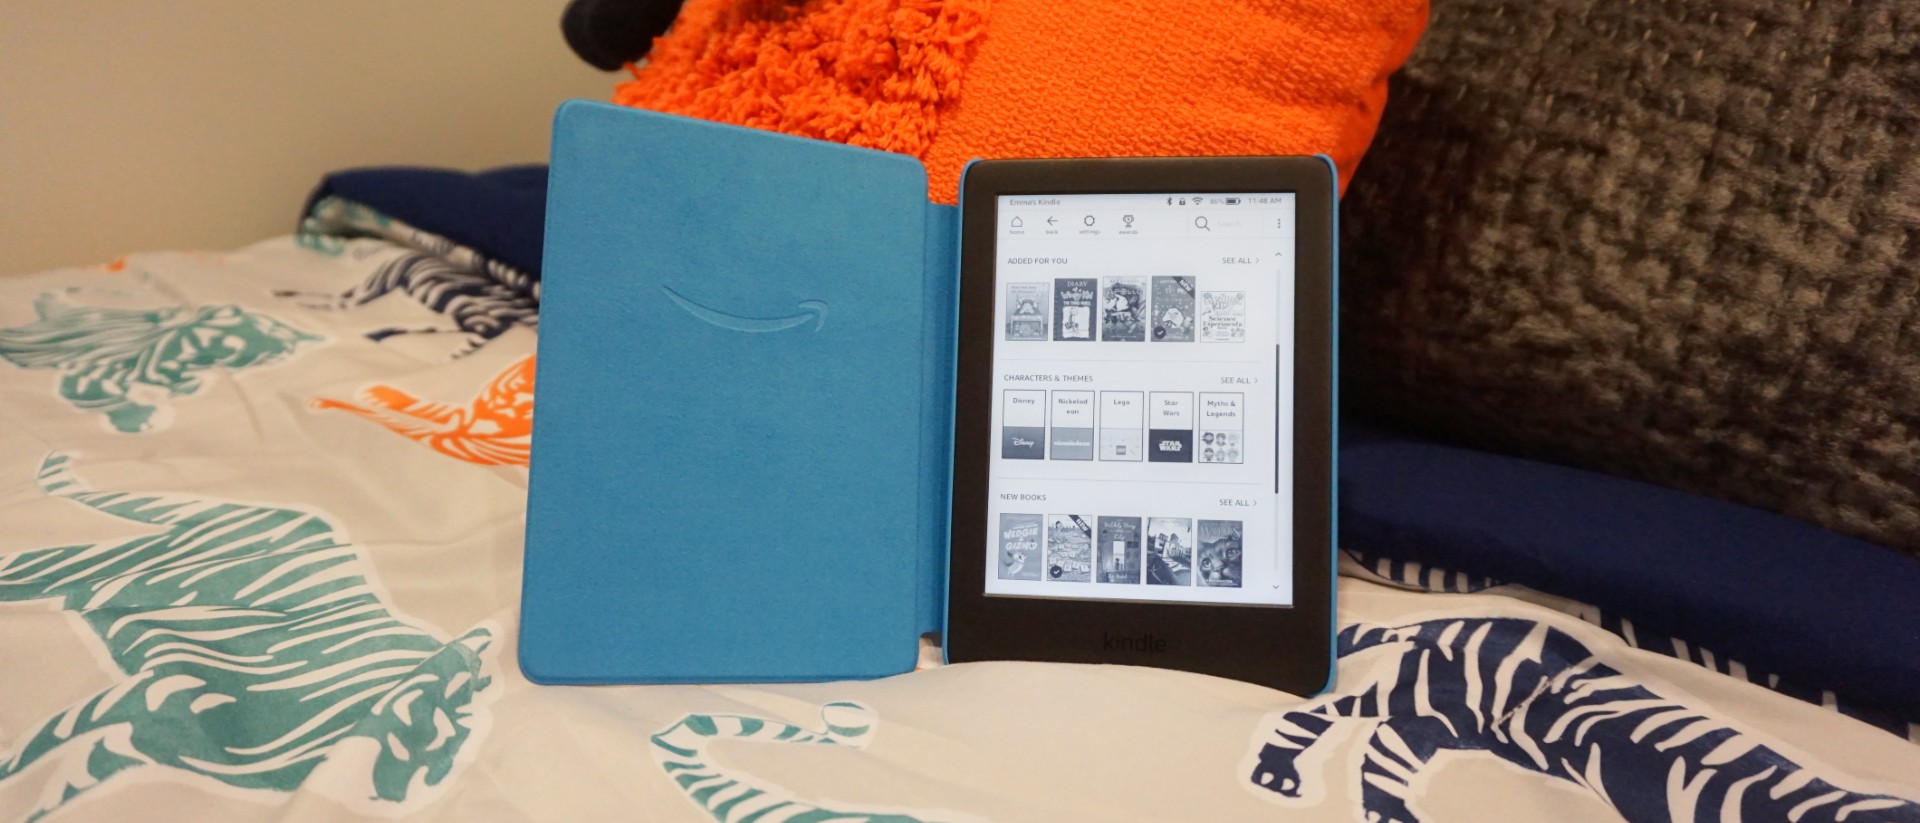 Kindle for Kids review